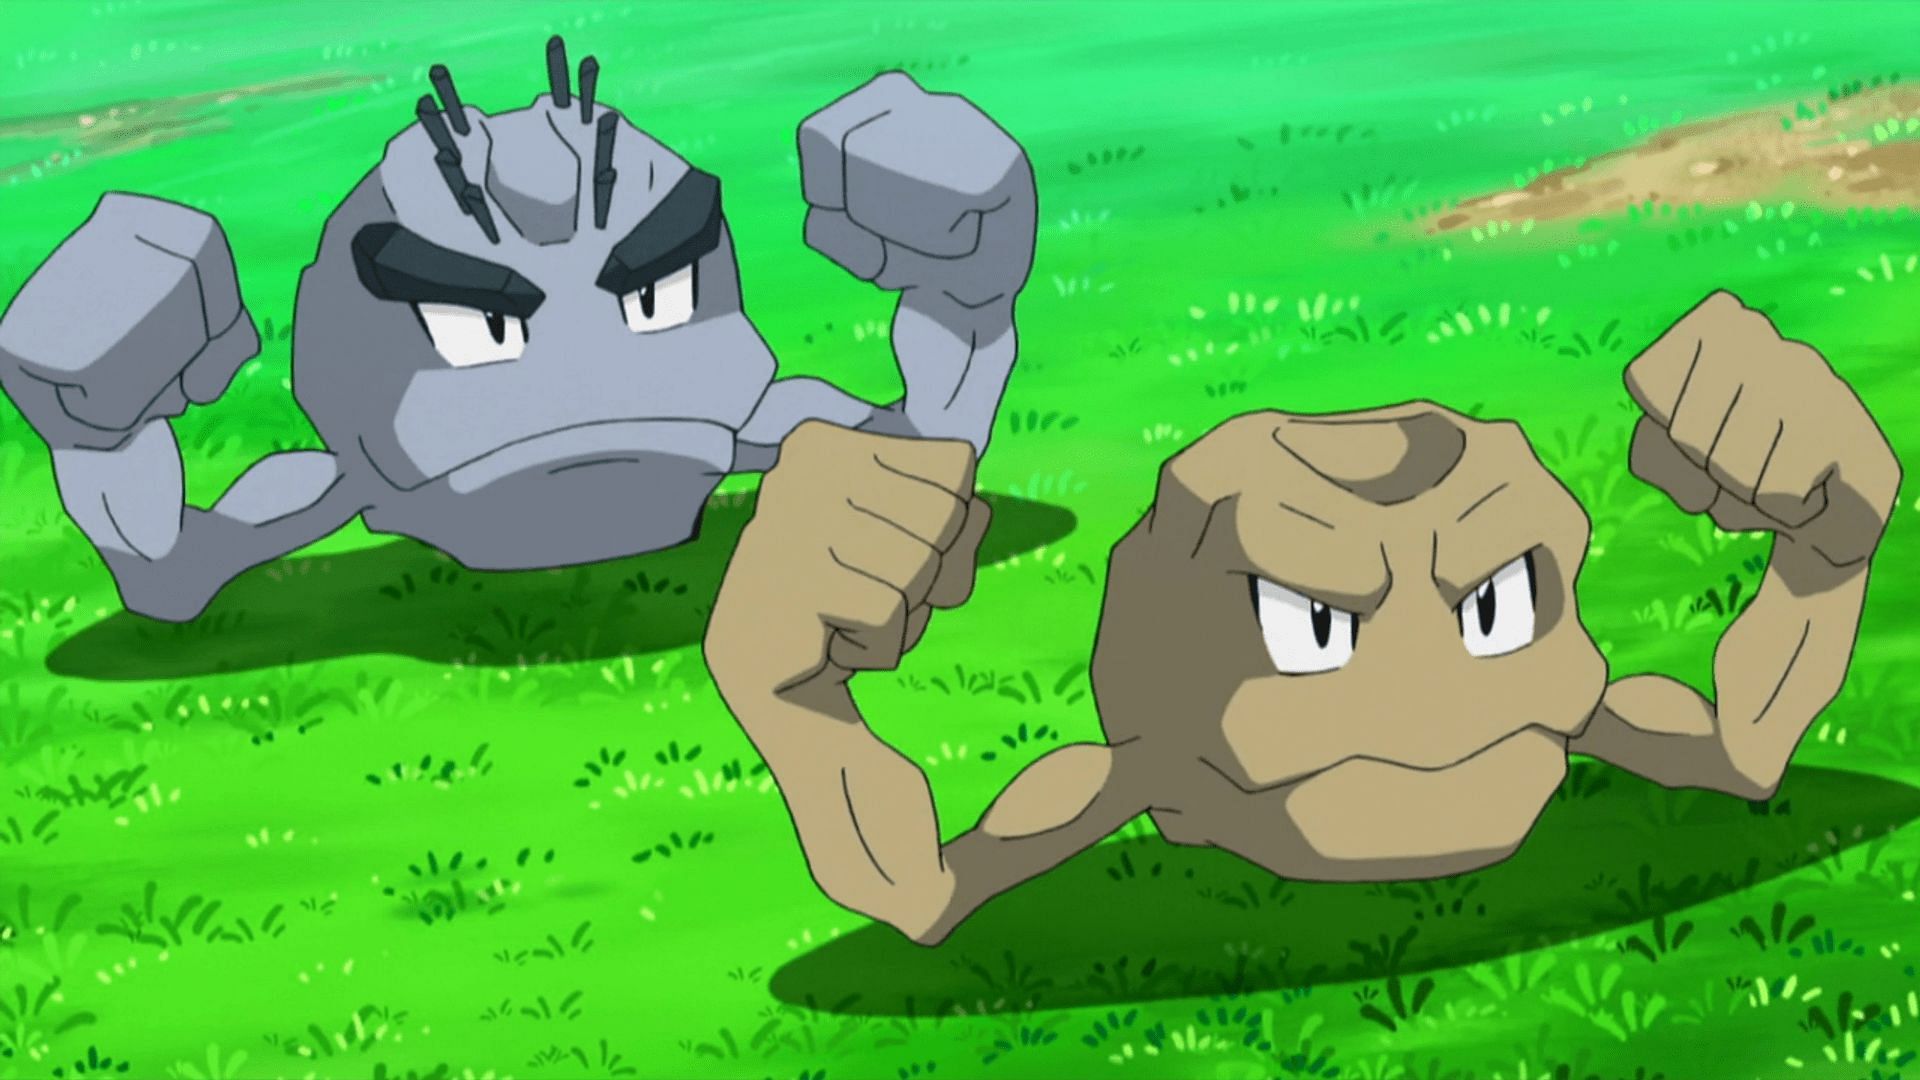 Alolan Geodude (left) and a standard Geodude (right) pictured in the anime (Image via The Pokemon Company)